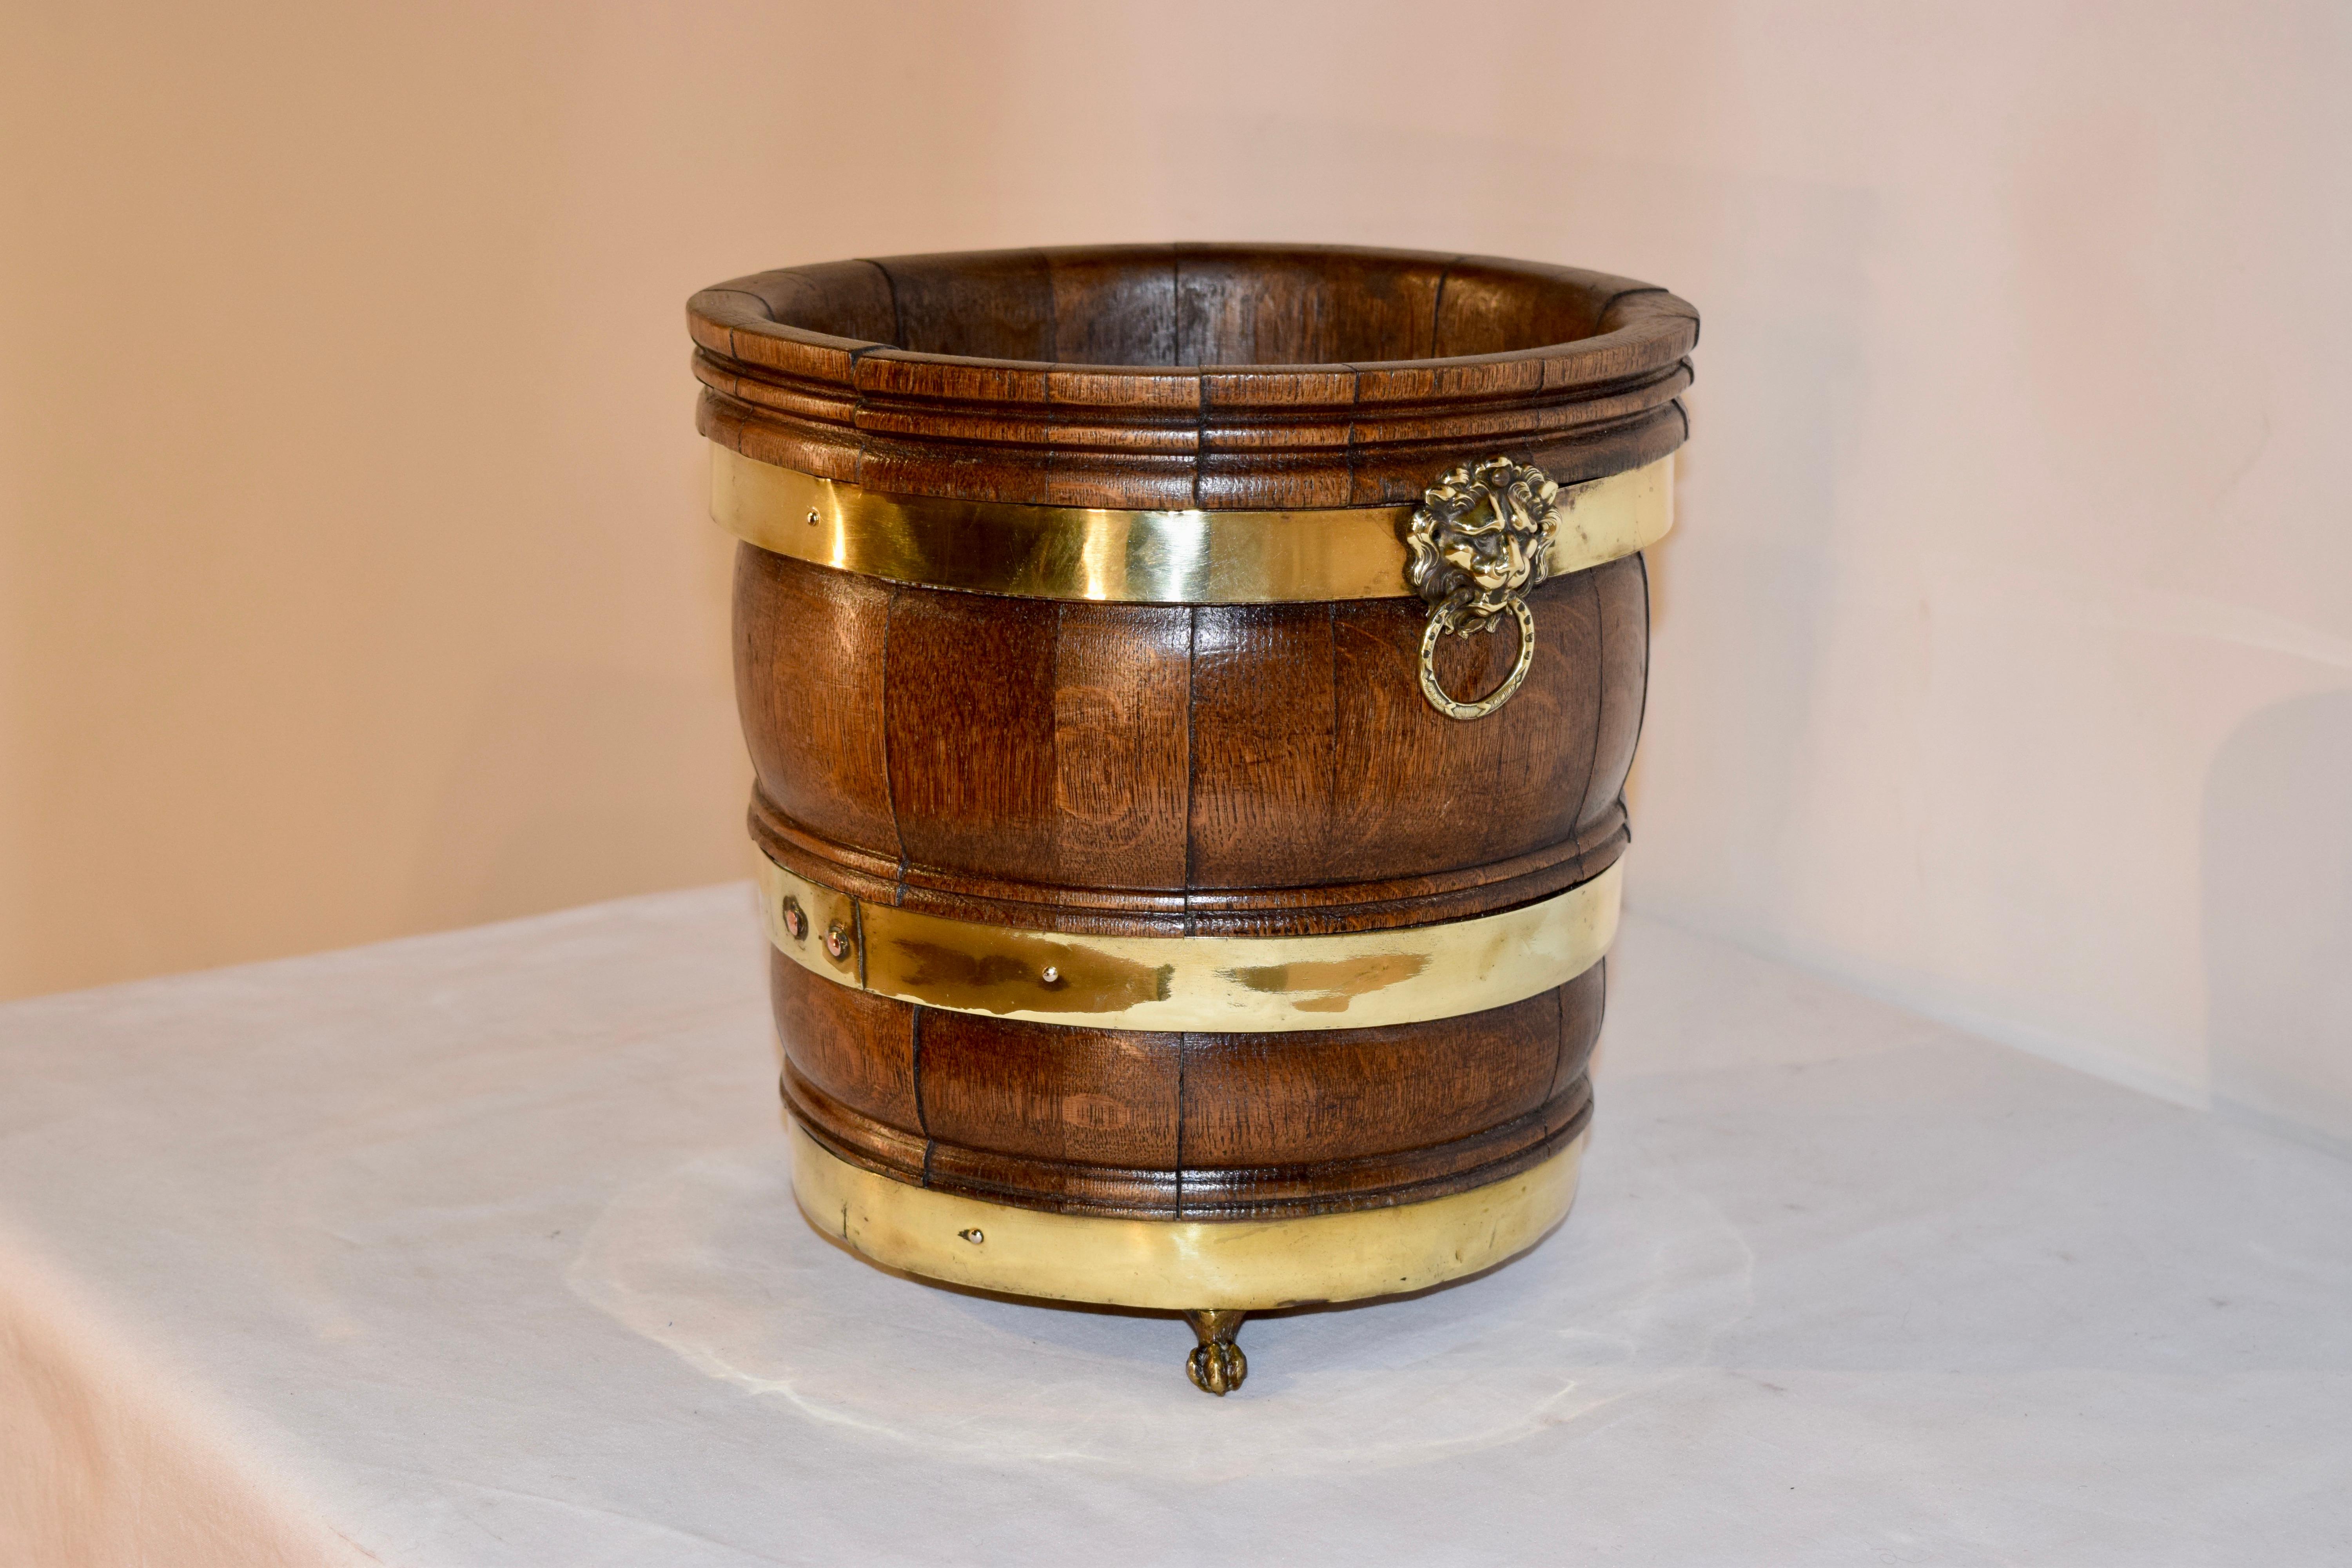 19th century strapped planter from England made from molded oak staves and strapped with brass belts. It has hand cast brass lion's head handles on the sides and is supported on cast brass feet.